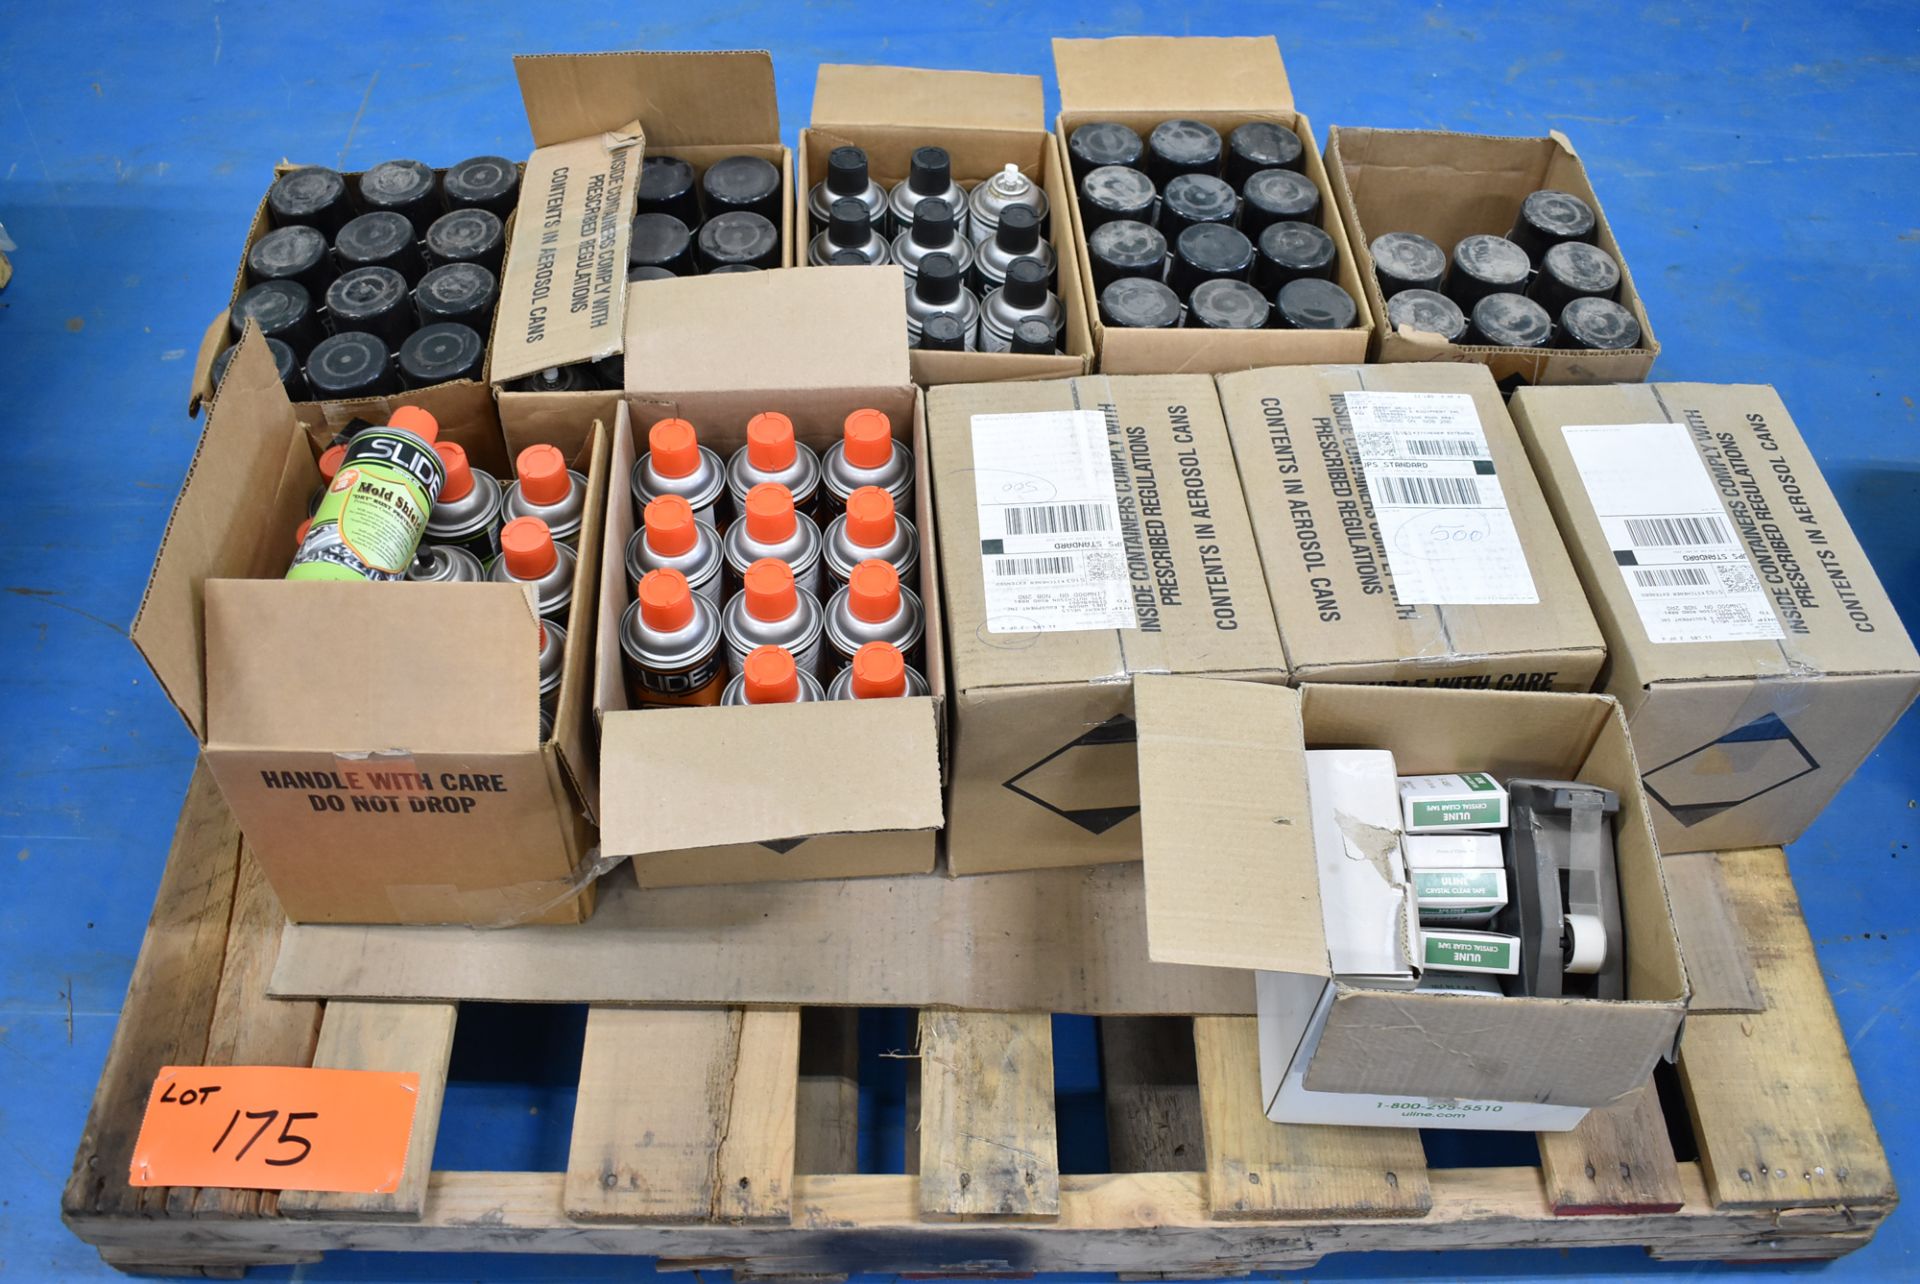 LOT/ SKID WITH SLIDE MOULD SHIELD RUST PROTECTOR & SLIDE ECONO-SPRAY WHITE LITHIUM PIN LUBE/GREASE